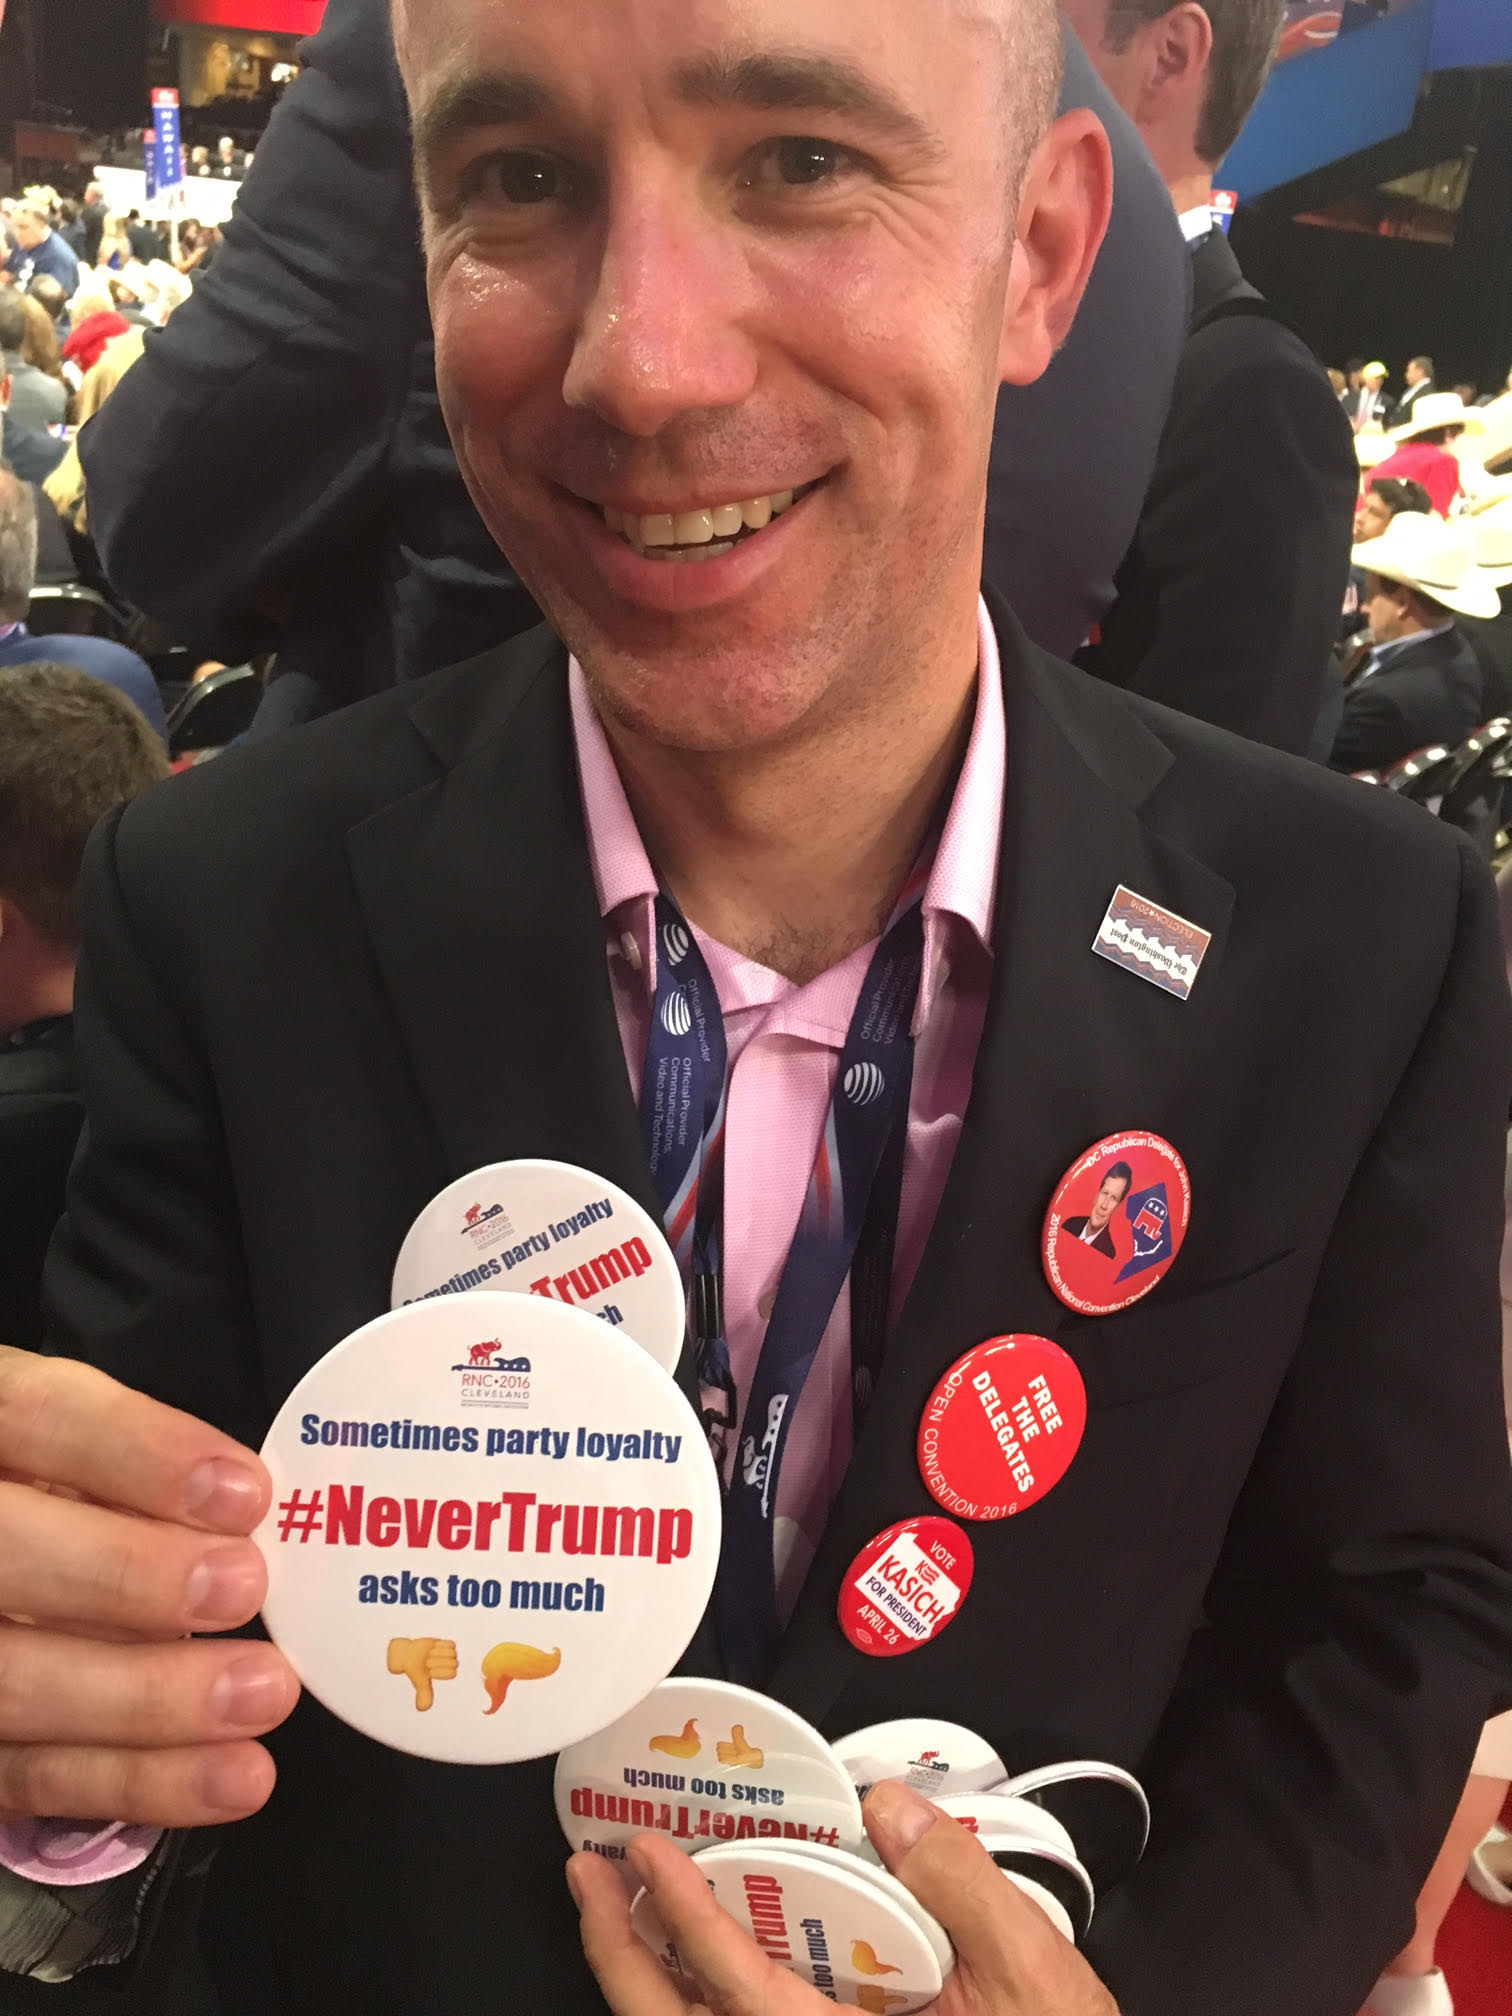 Justin Dillon, an alternate delegate from the District of Columbia is handing out 200 buttons opposing Donald Trump on the convention floor.